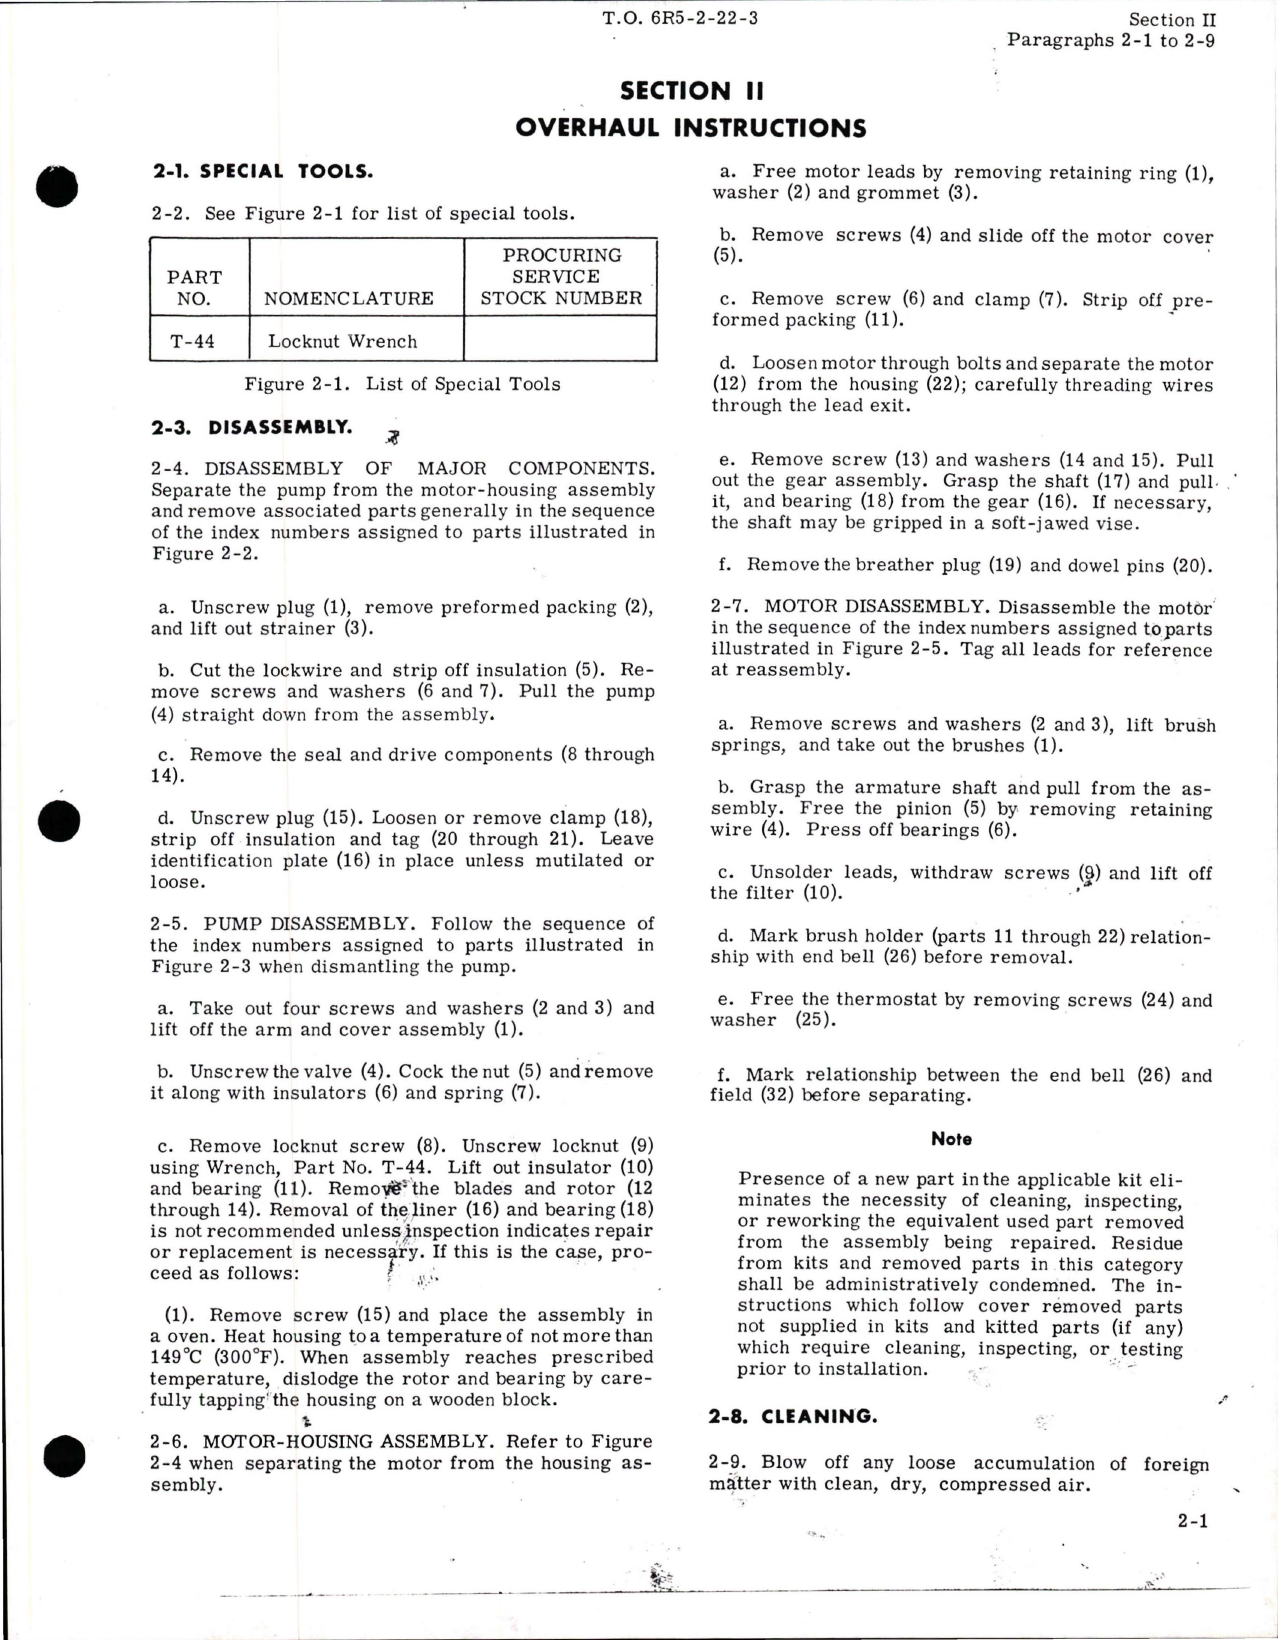 Sample page 7 from AirCorps Library document: Overhaul for Water Injection Pump - Model RD8500 Series 